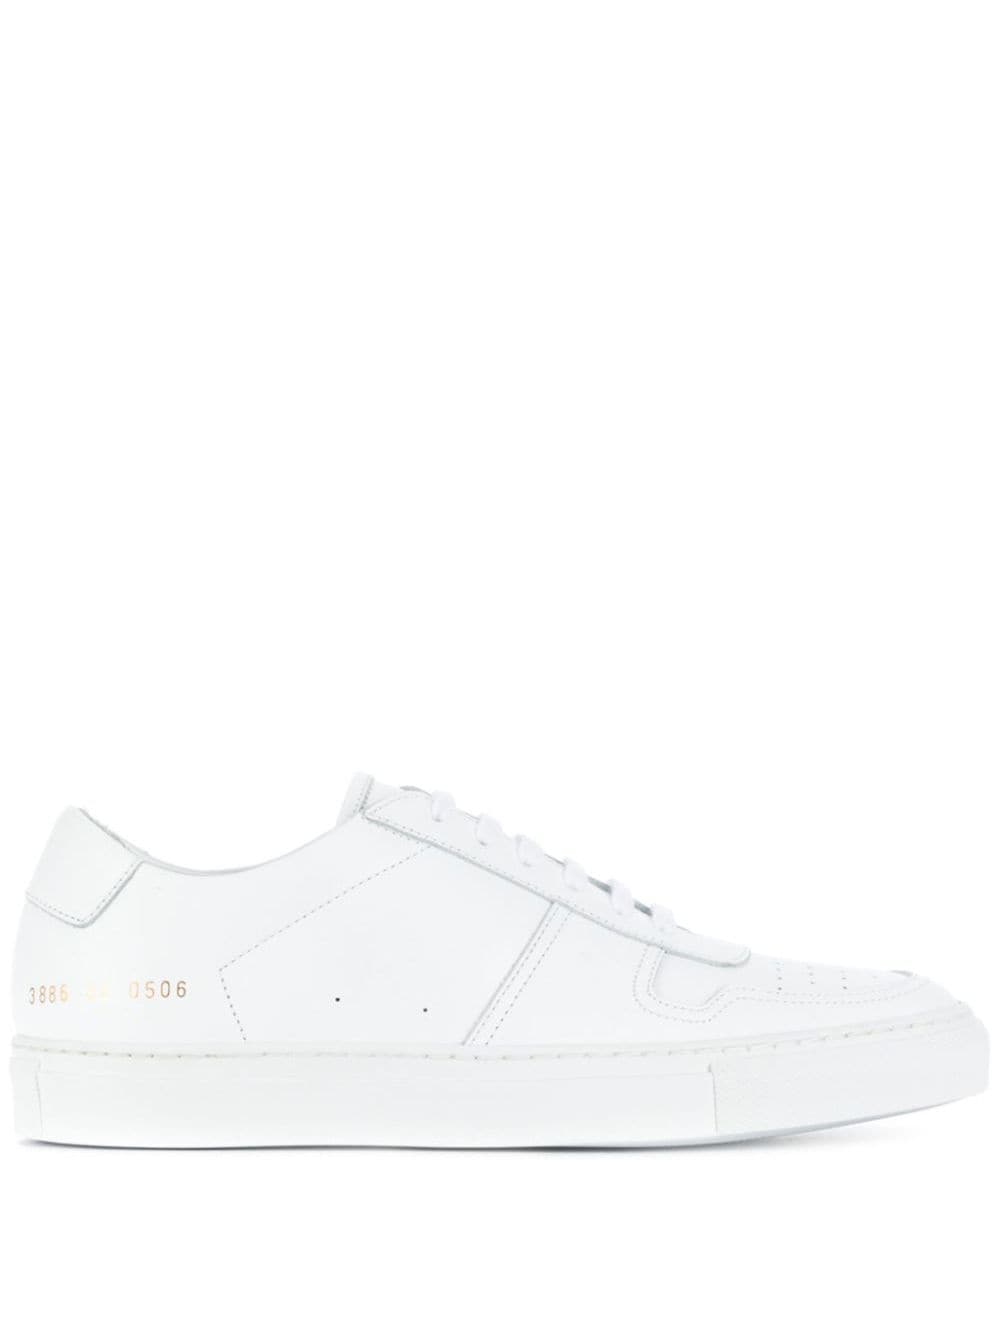 фото Common projects кроссовки bball